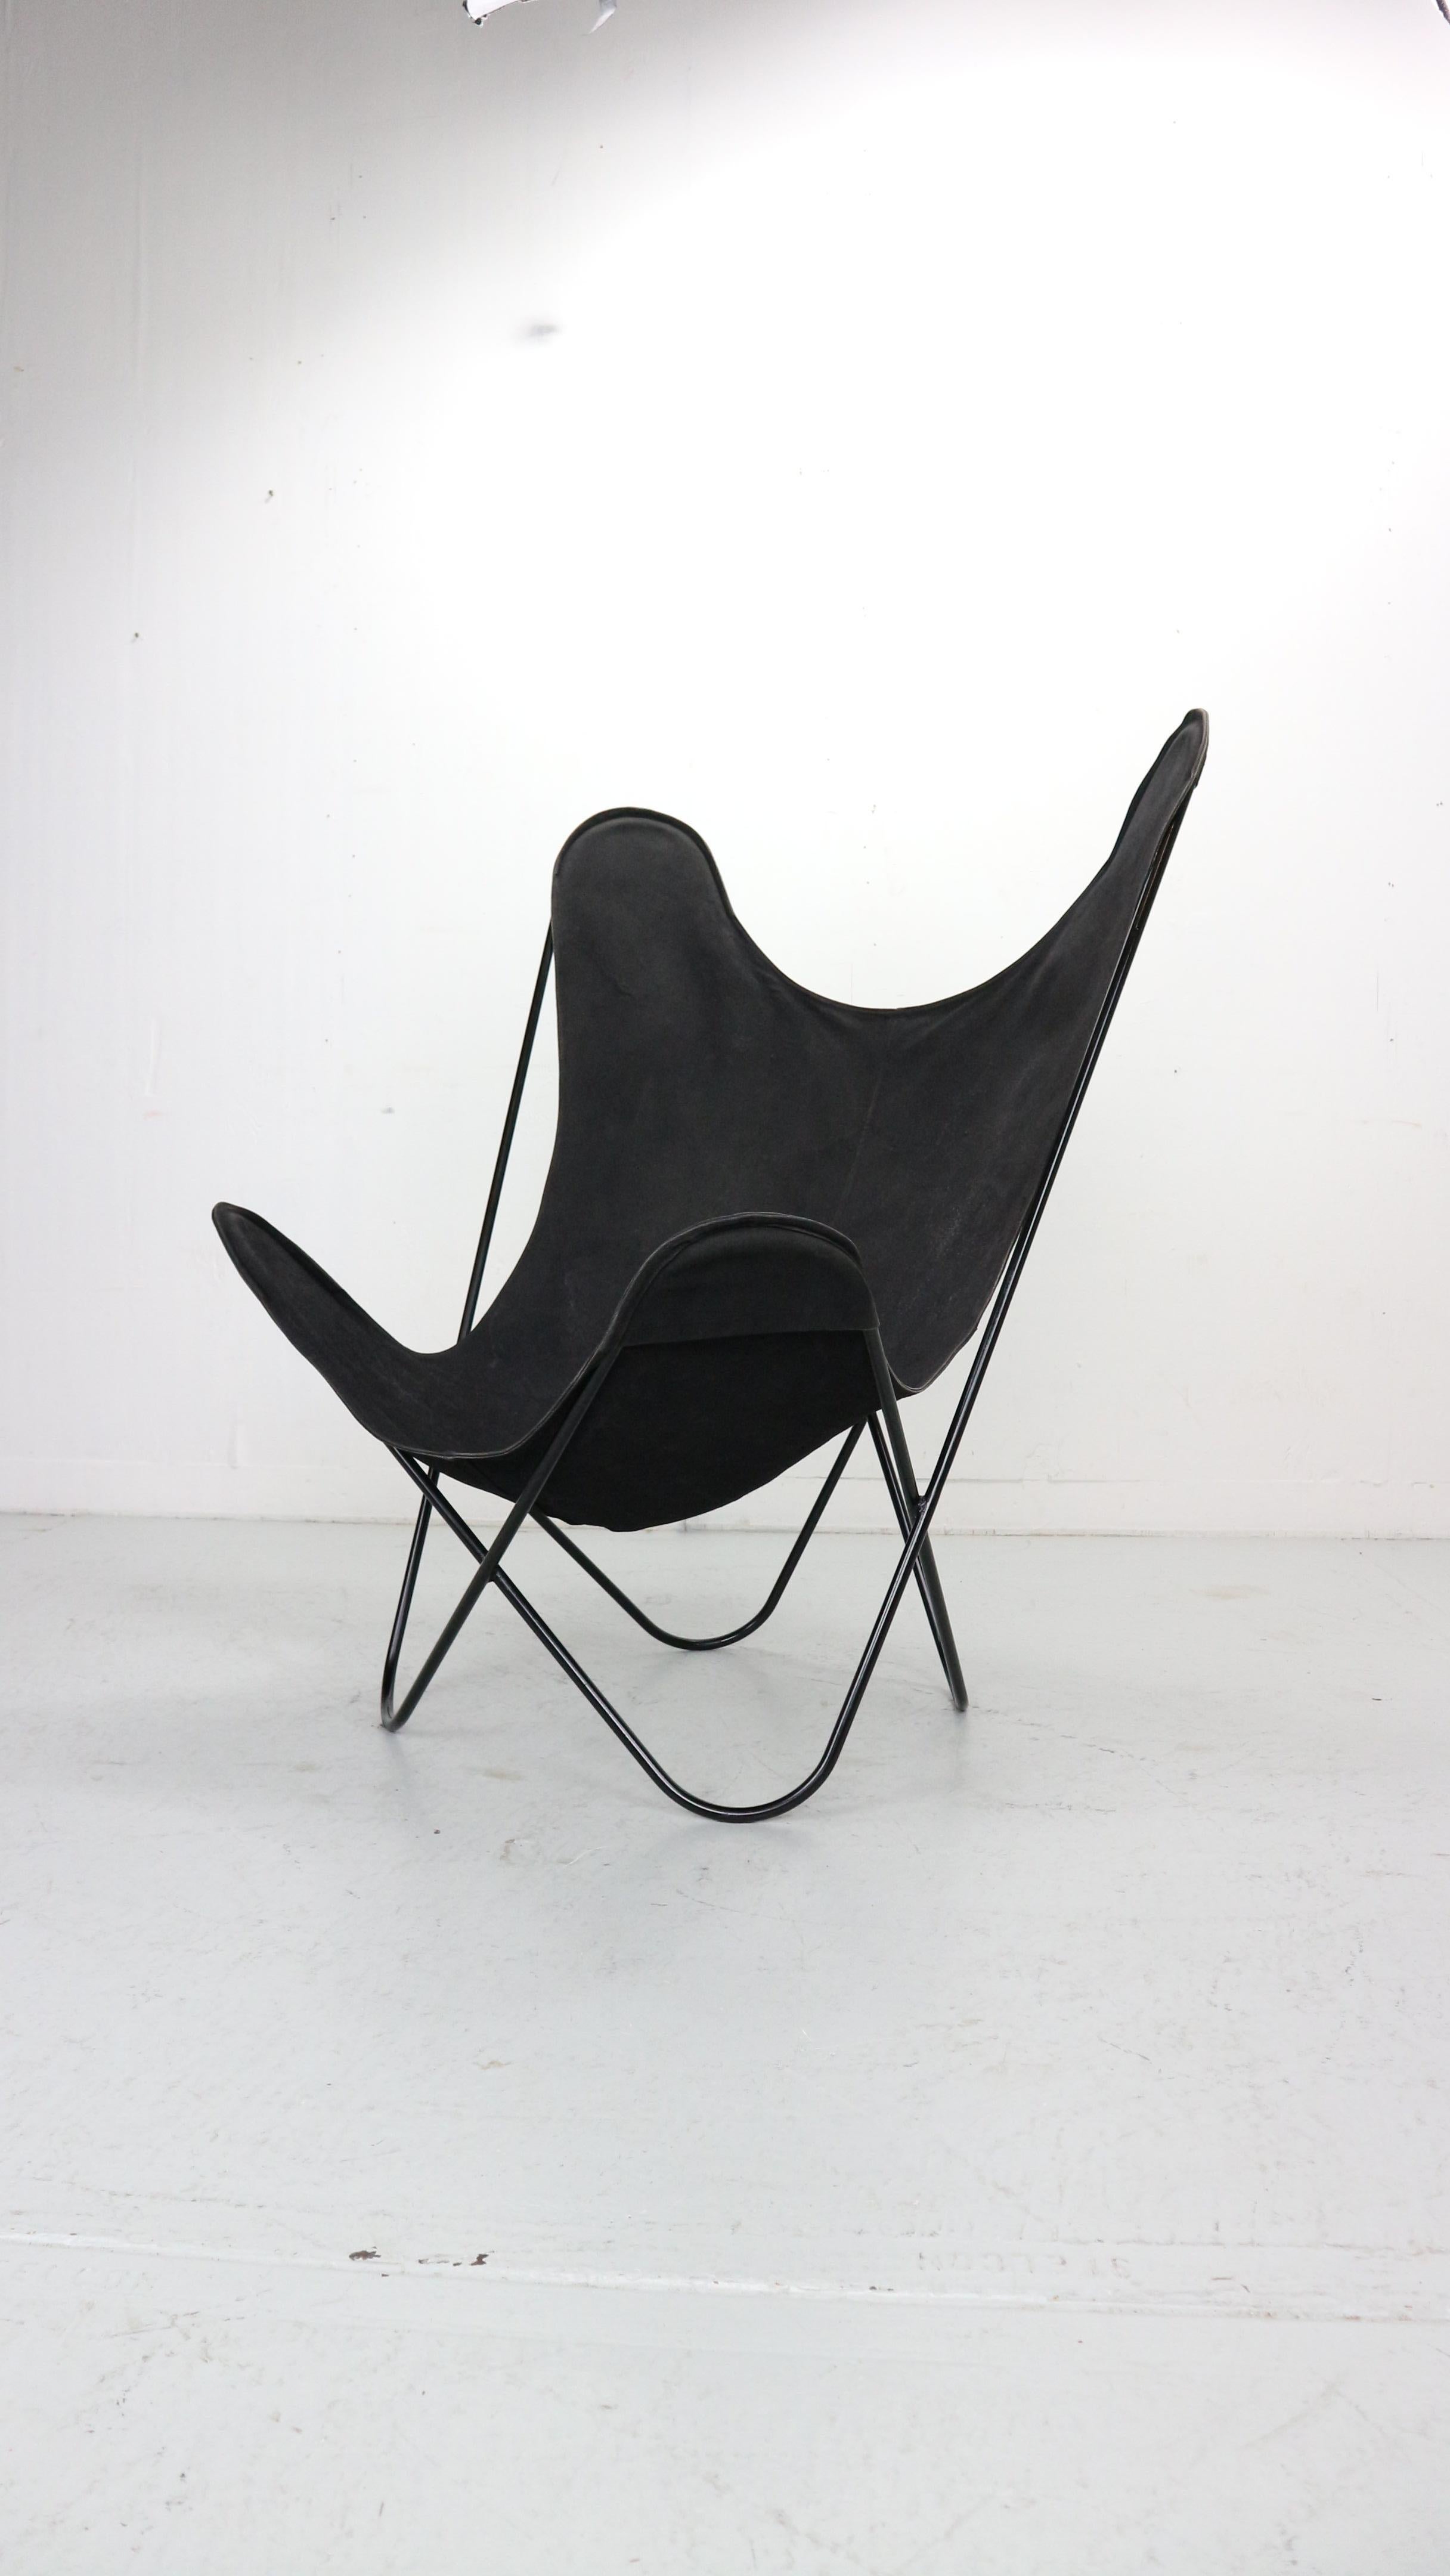 This black 'butterfly' chair was designed by Jorge Ferrari Hardoy in 1938 and was produced in the 1970s. It is made from metal frame with canvas and is in a good vintage and original condition. The fabric is original. We added a sheepskin to the